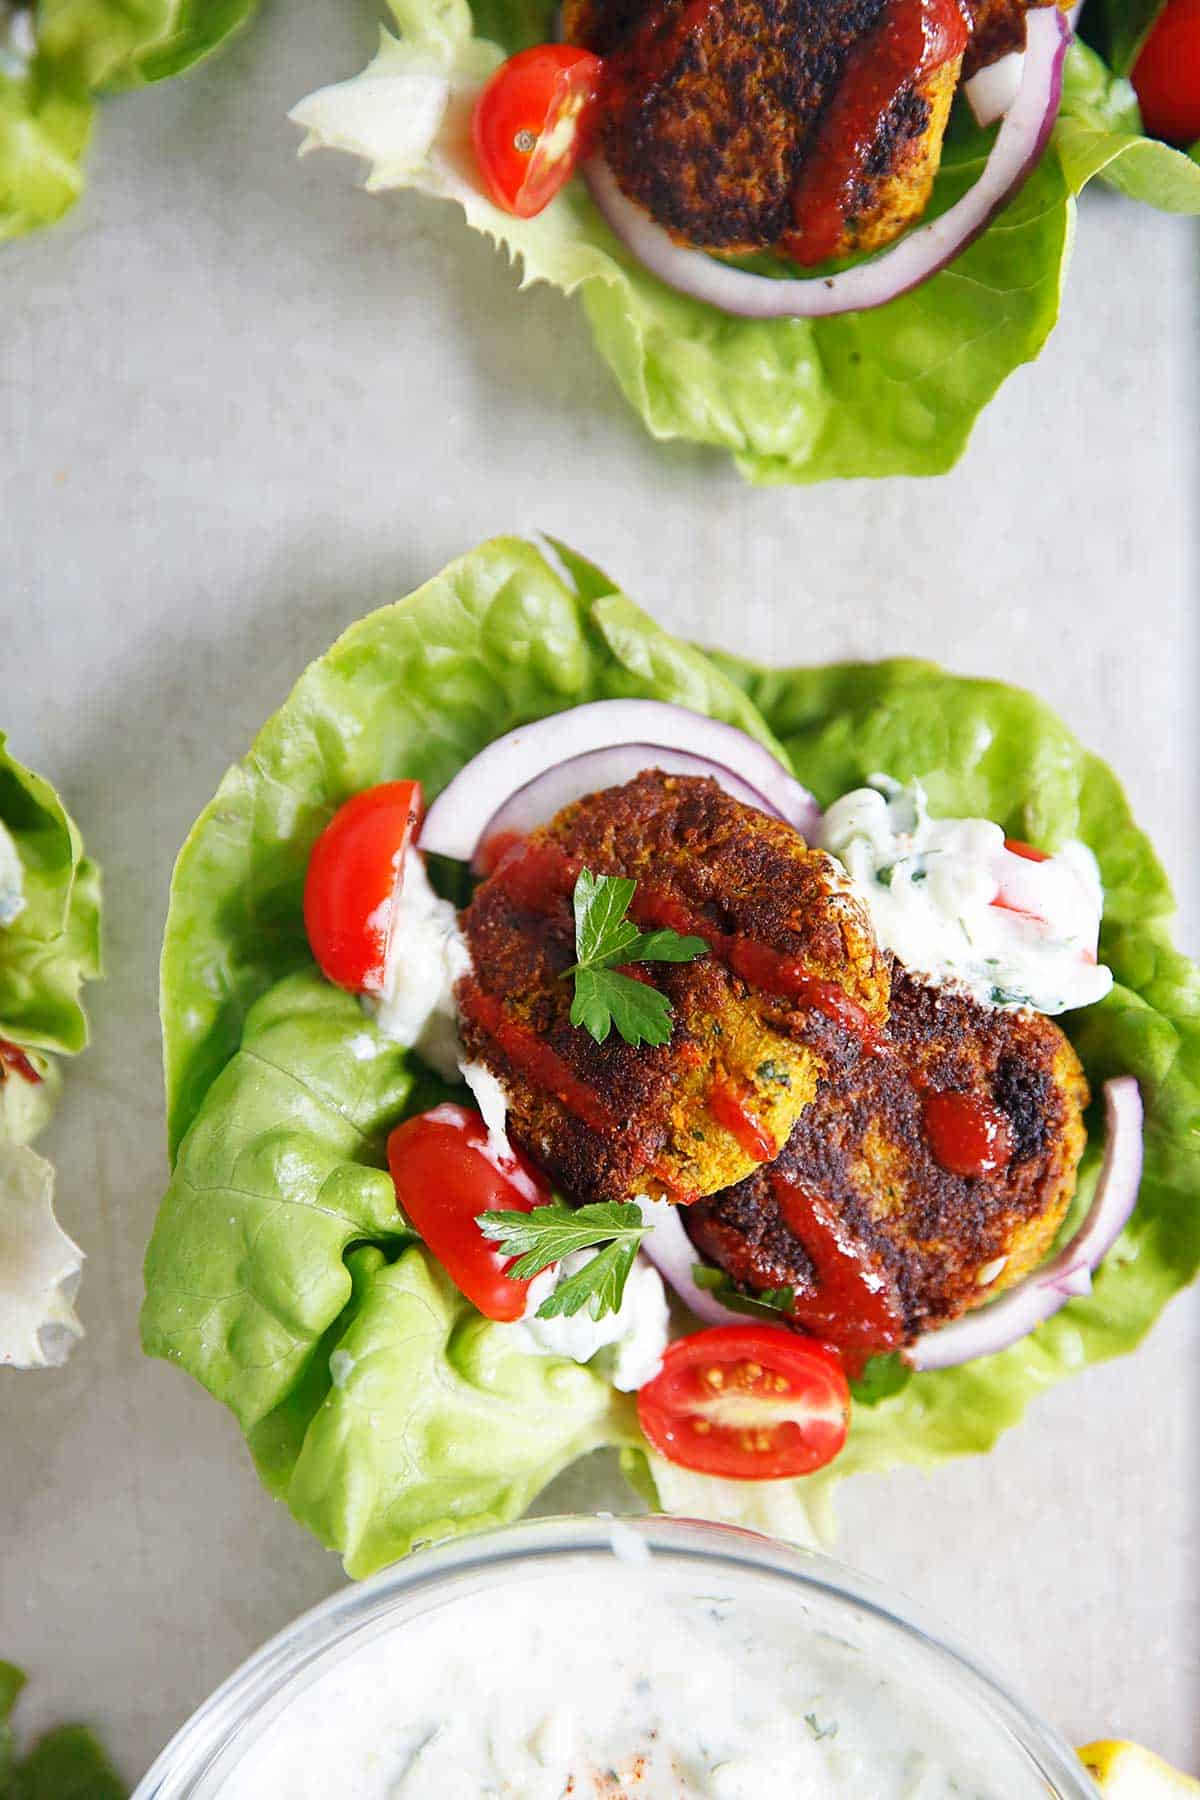 Paleo Falafel made without beans